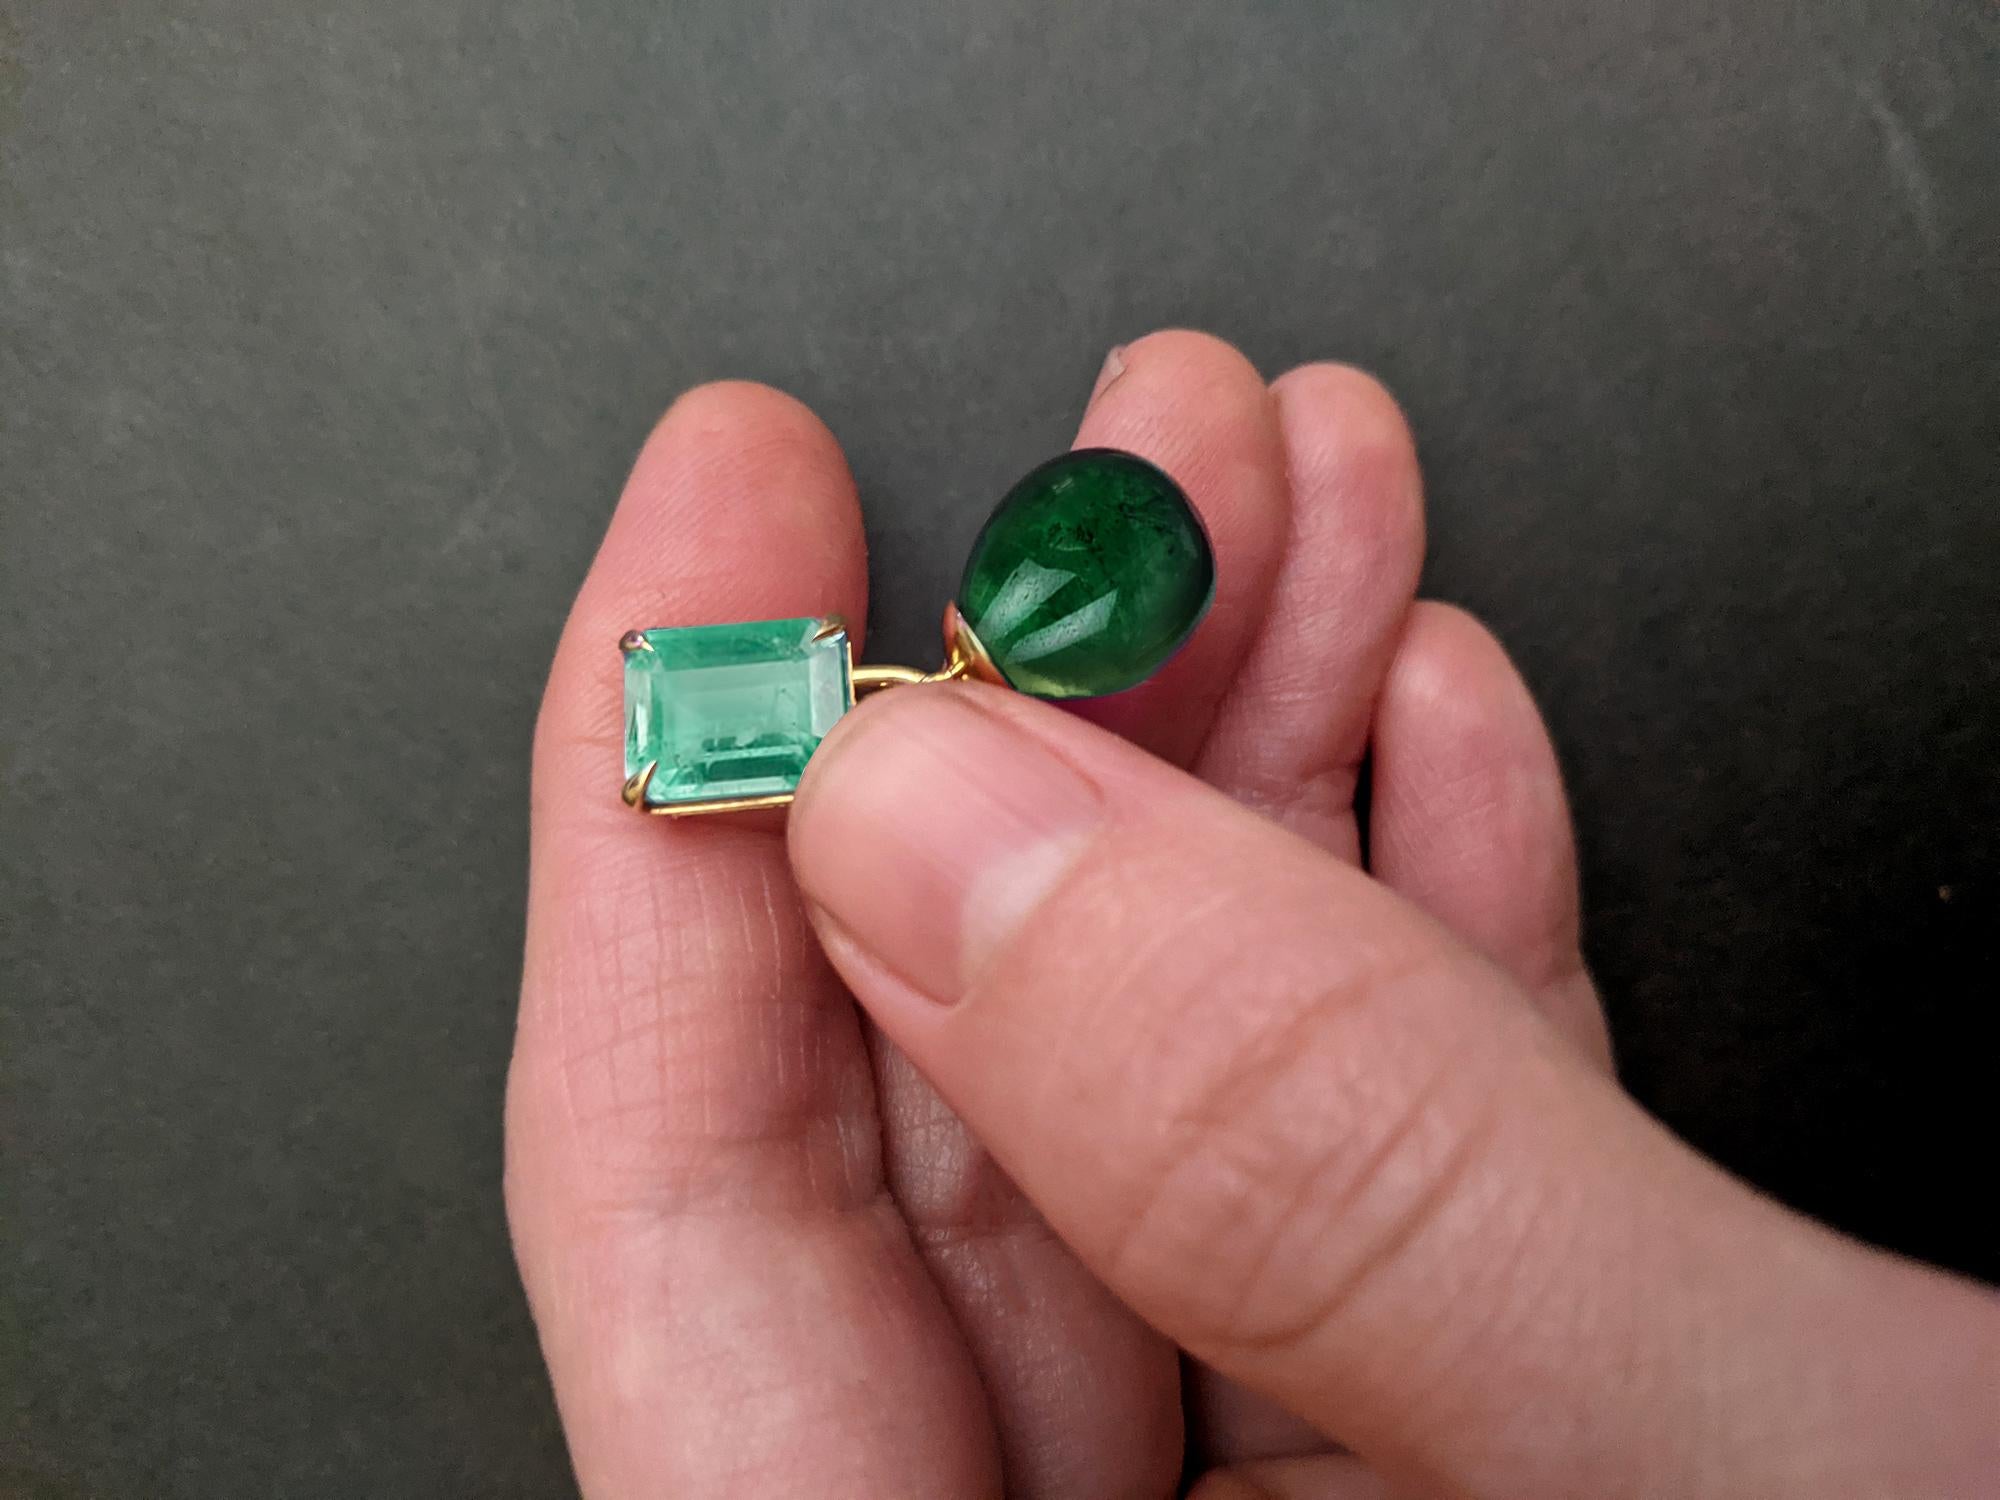 This contemporary brooch is meticulously handcrafted from 18 karat yellow gold, featuring a natural emerald in an octagon cut. The emerald measures 0.27x0.21 inches (7x5.5 mm). The brooch also includes a detachable drop, which measures 0.37x0.27